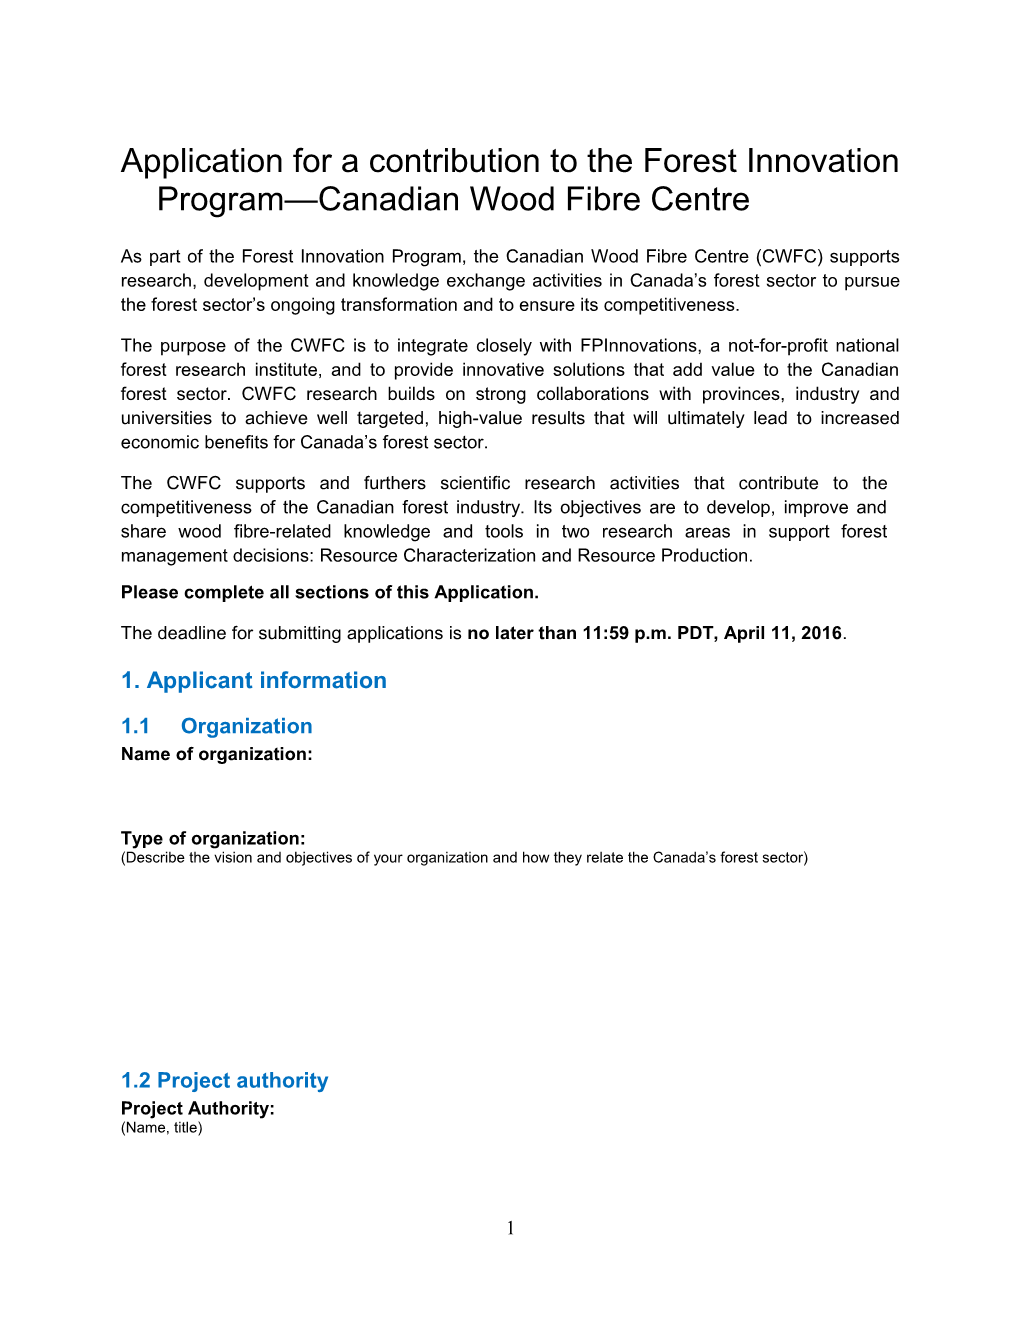 Application for a Contribution to the Forest Innovation Program Canadian Wood Fibre Centre